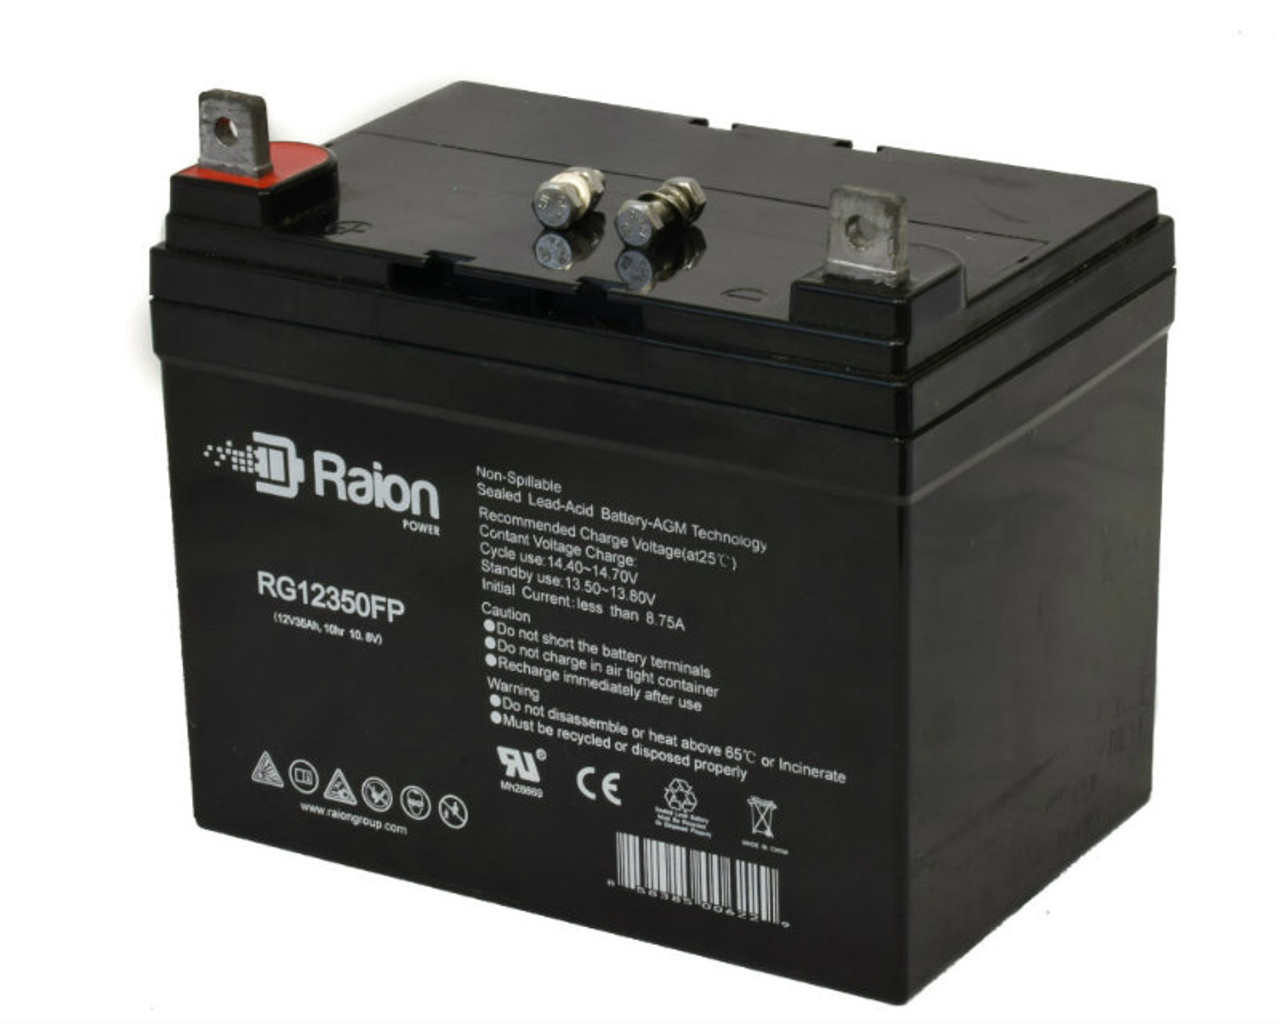 Raion Power Replacement 12V 35Ah RG12350FP Battery for Vision 6FM33-X